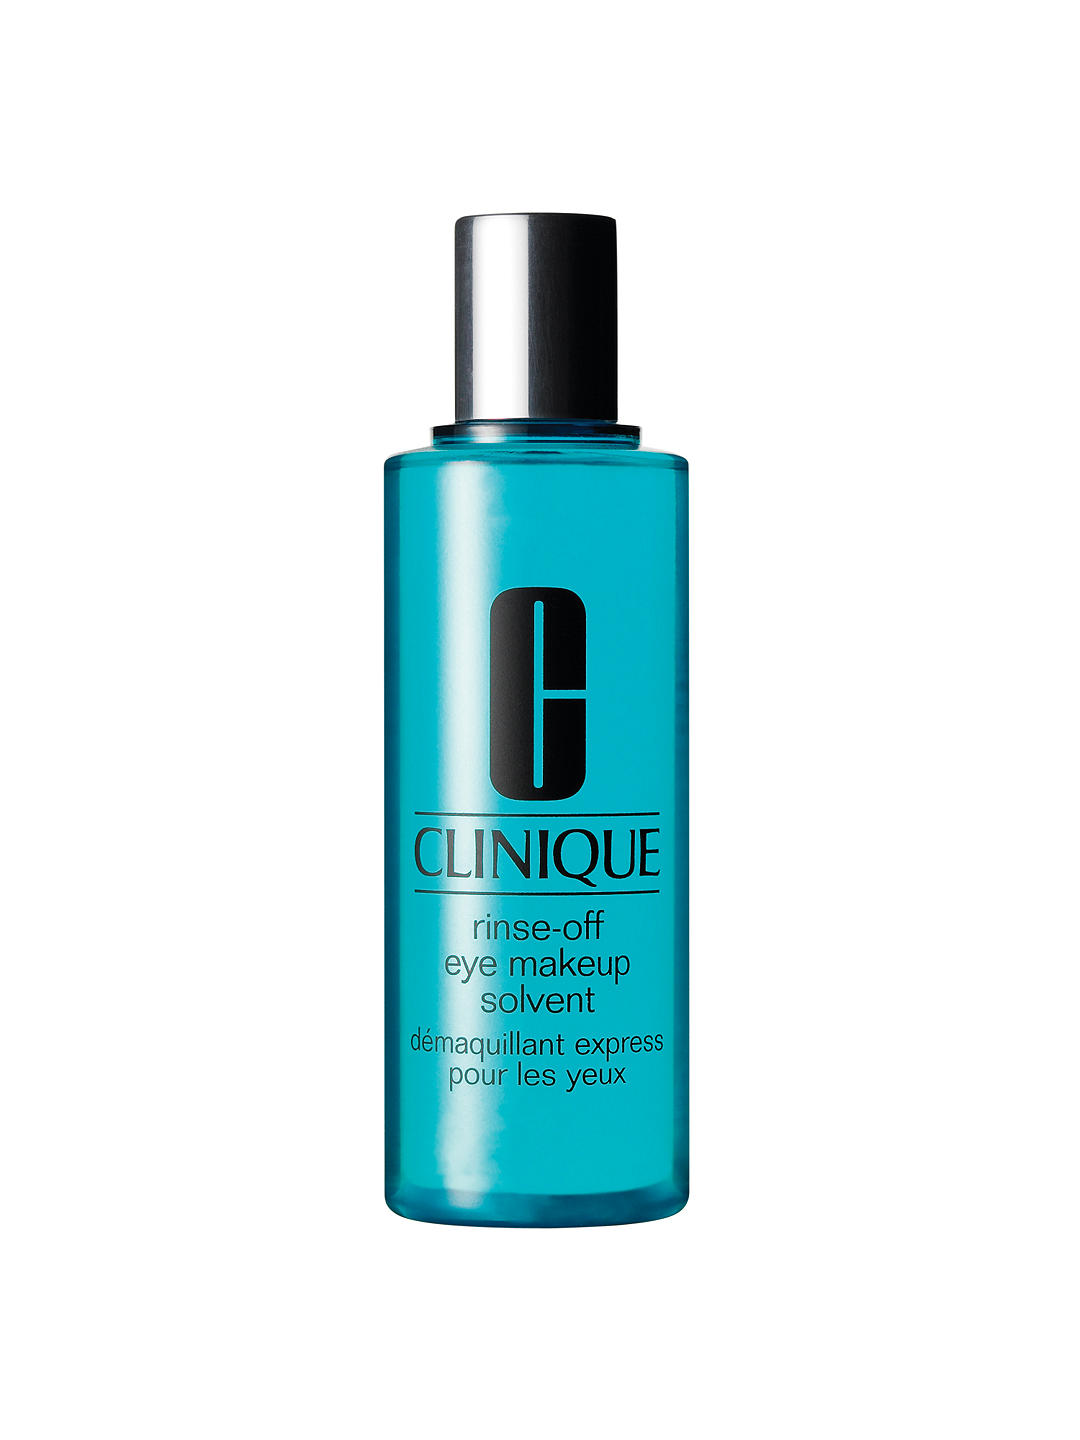 Clinique Rinse-Off Eye Makeup Solvent - All Skin Types, 125ml 1